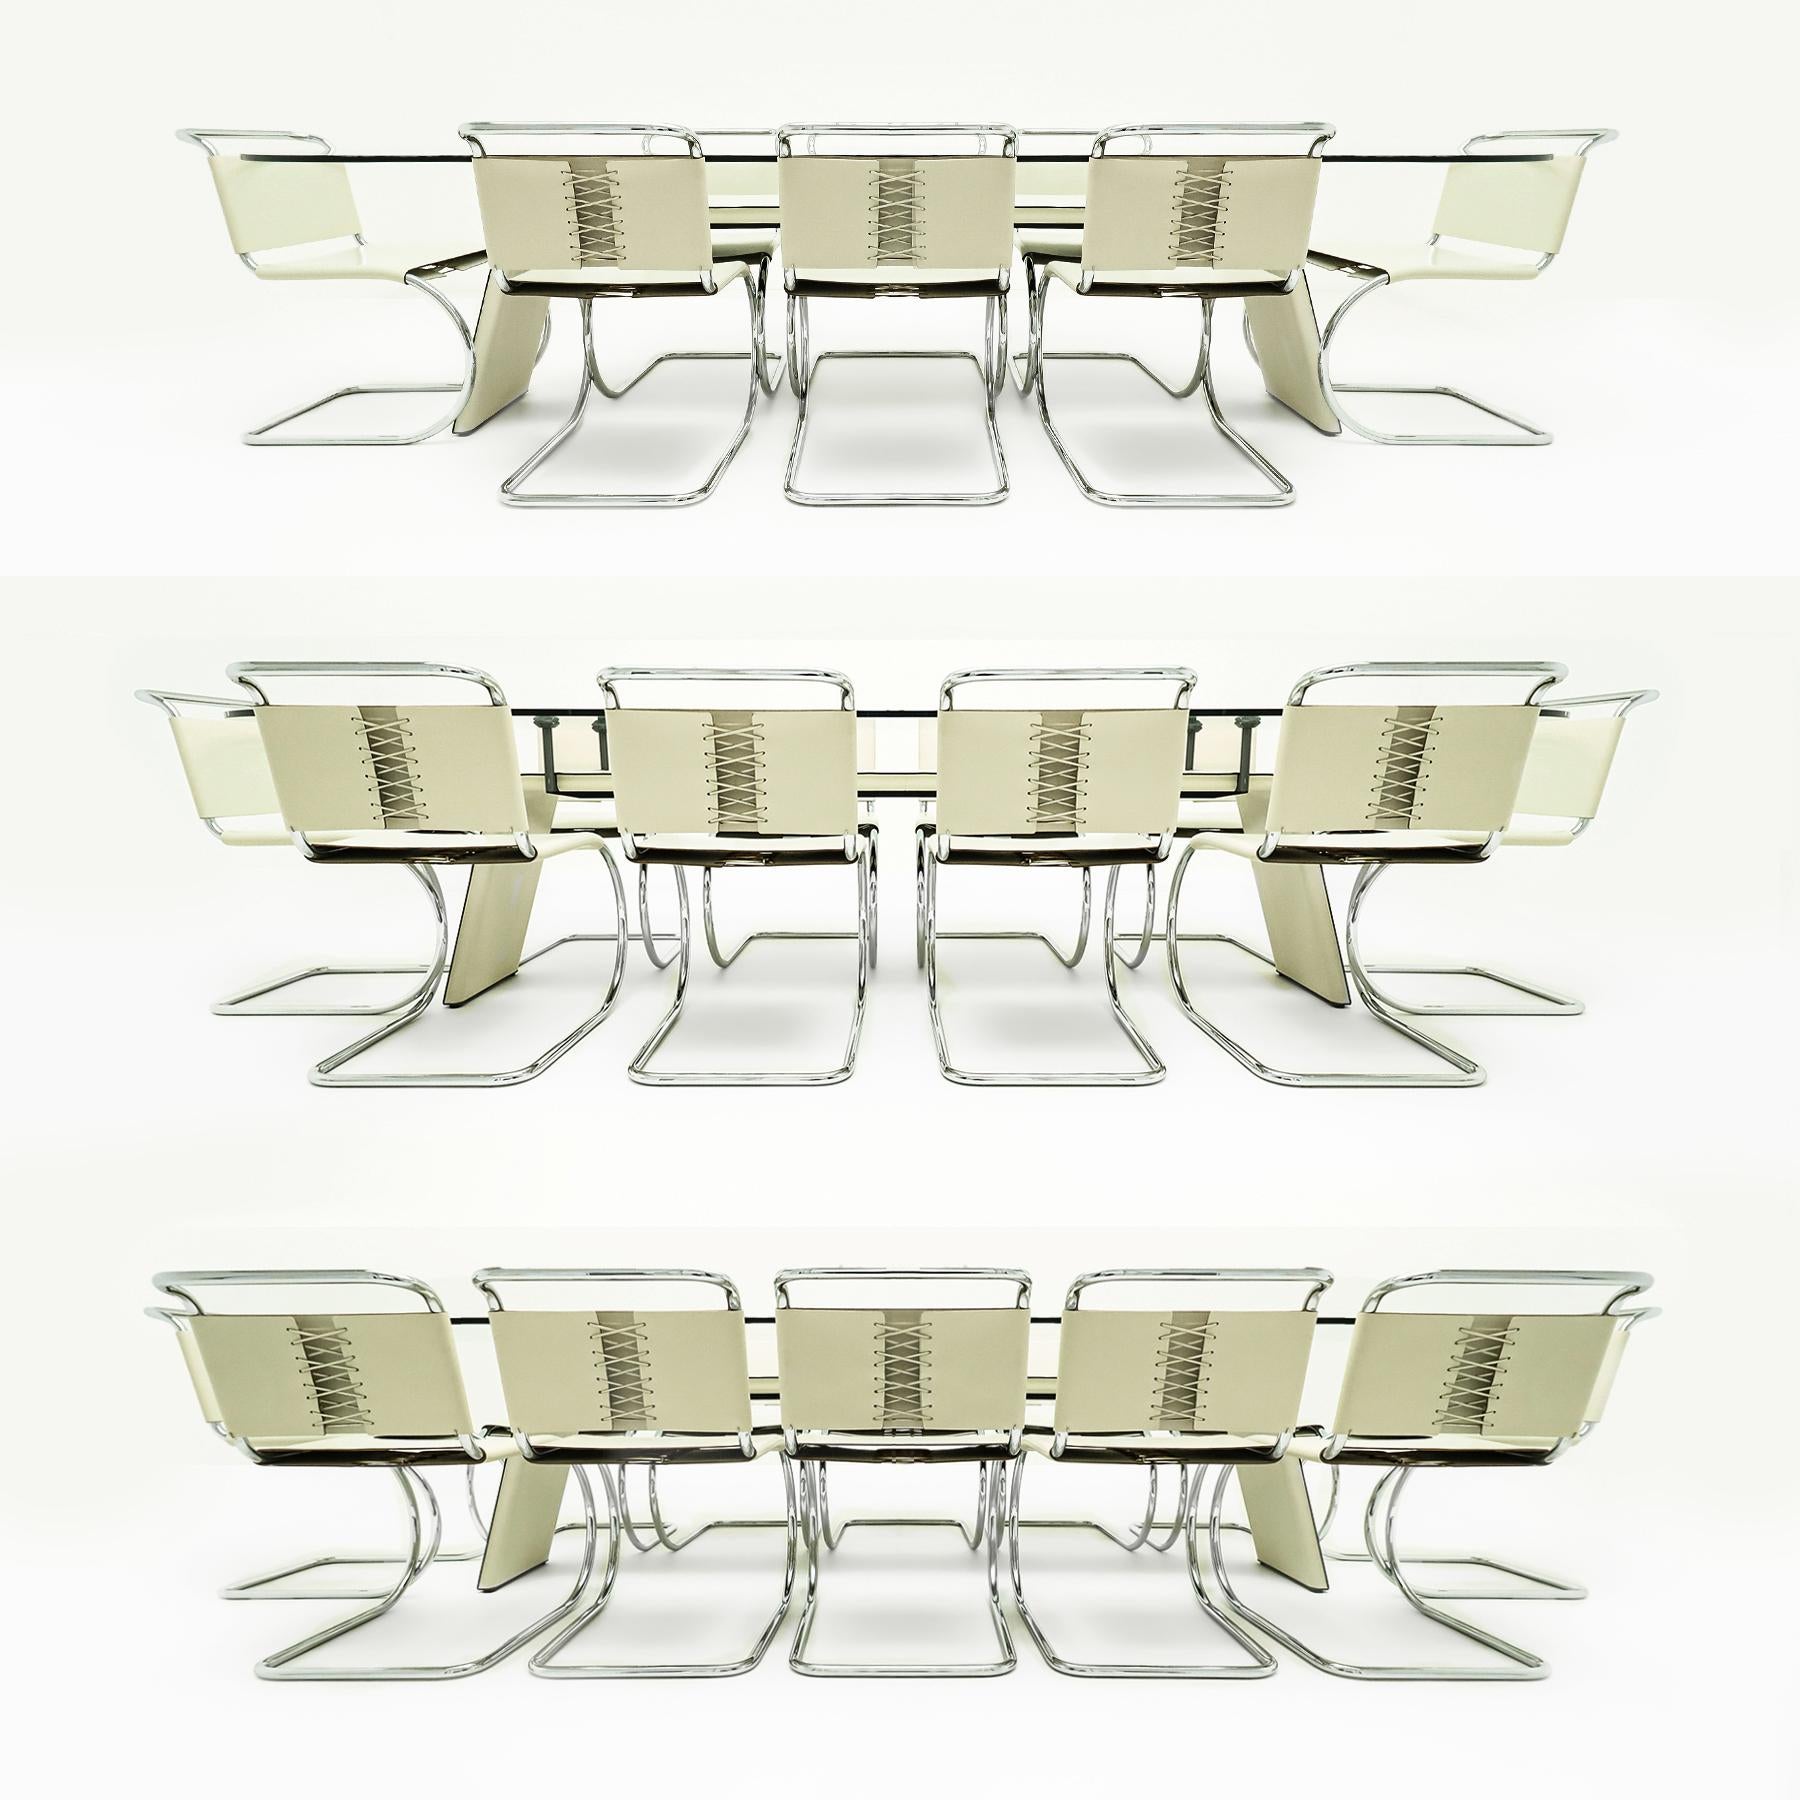 12 Knoll, Mies van der Rohe MR10 chairs matched to a Matteo Grassi dining table 1